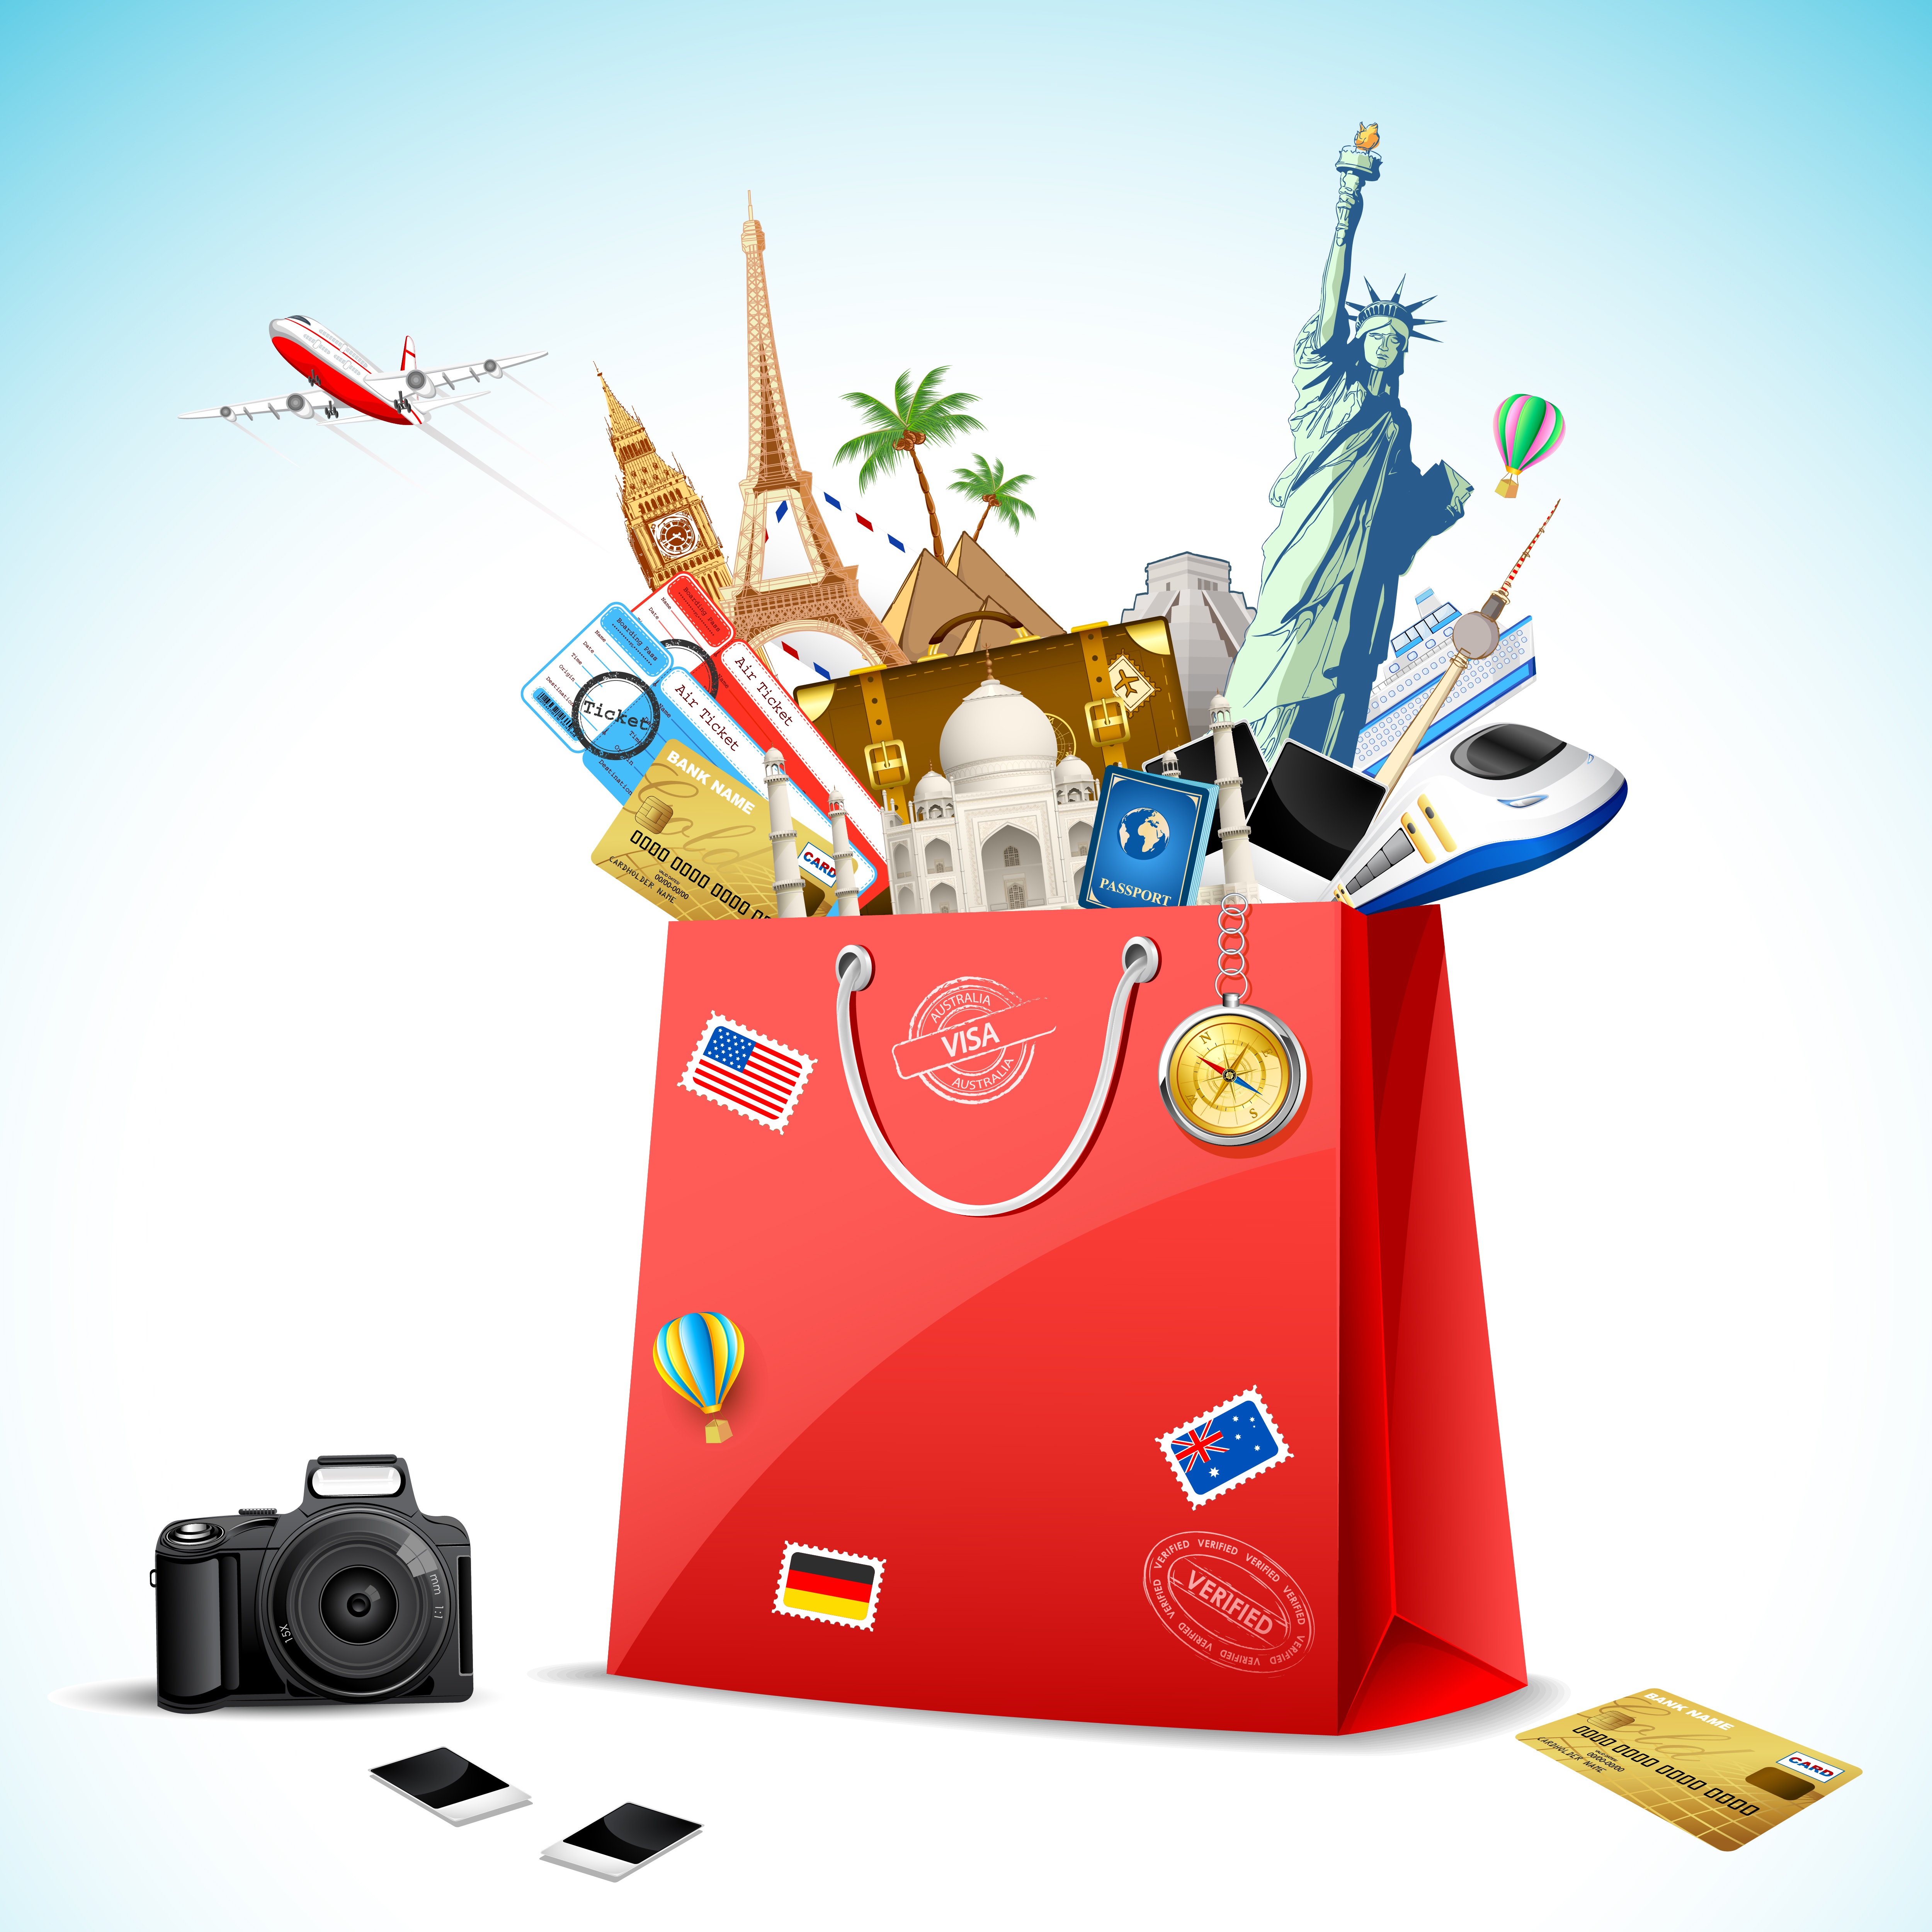 Why Shopping Baskets Are a Winning Proposition for Tour Operators